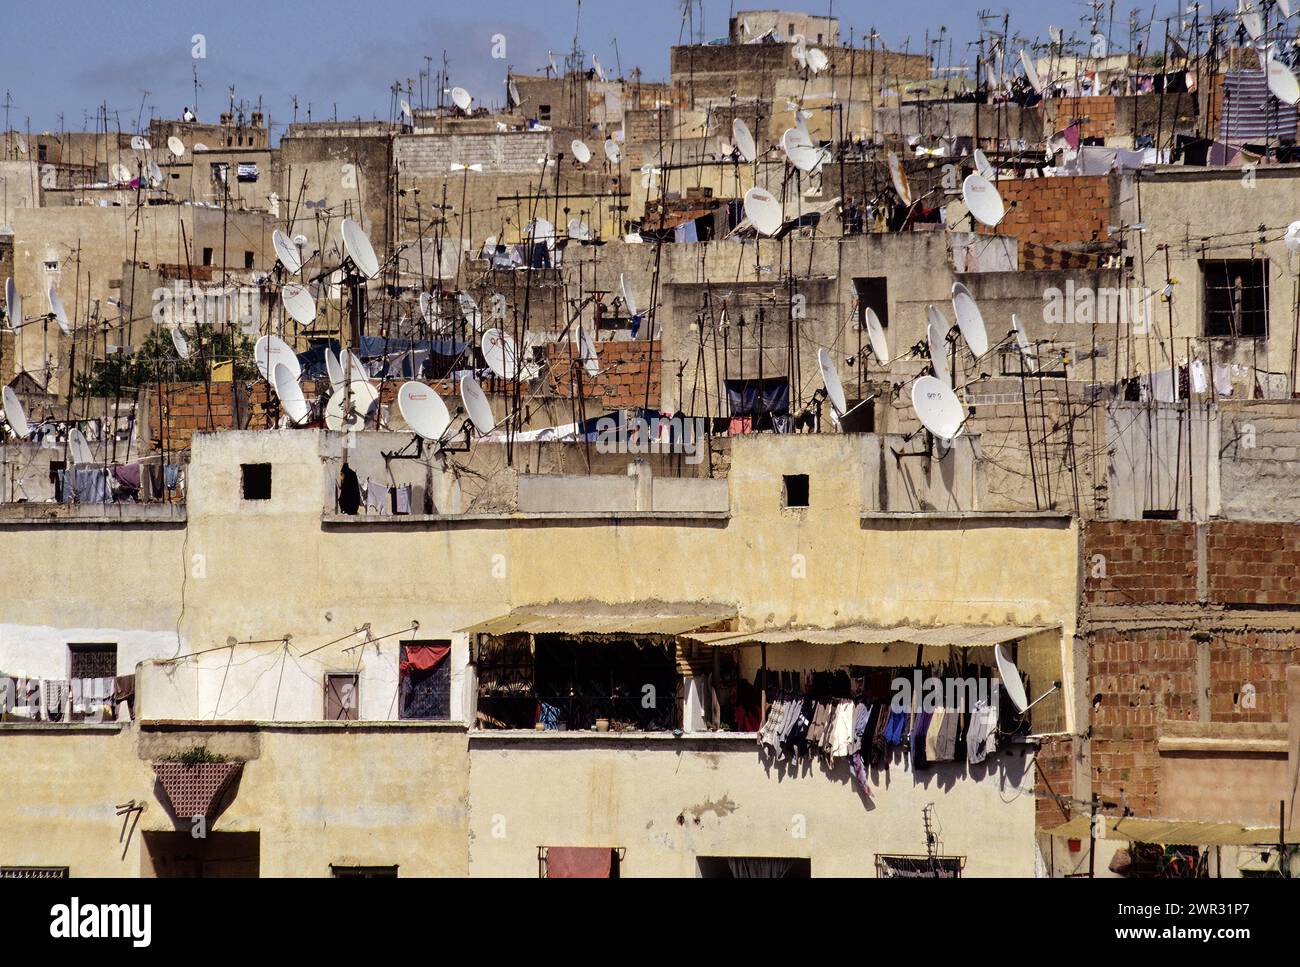 Fez, Morocco - These satellite dishes in heart of old Fez illustrate how the city is in transition between the modern and the traditional way of life. Stock Photo